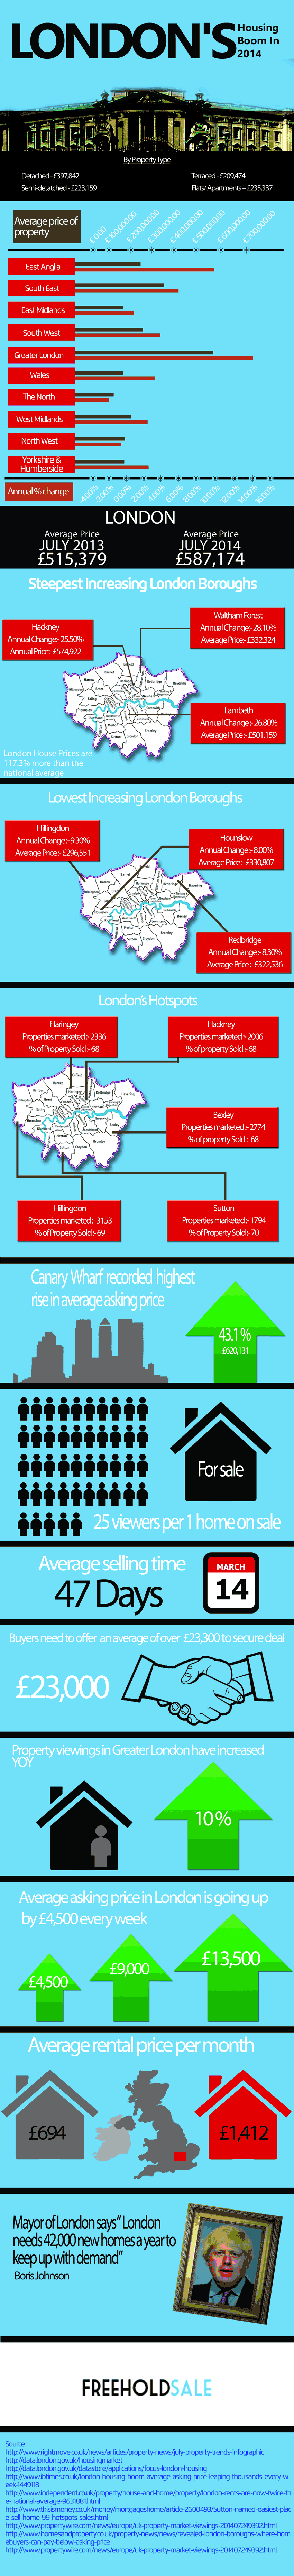 London Housing Boom in 2014 - infographic by Freehold Sales